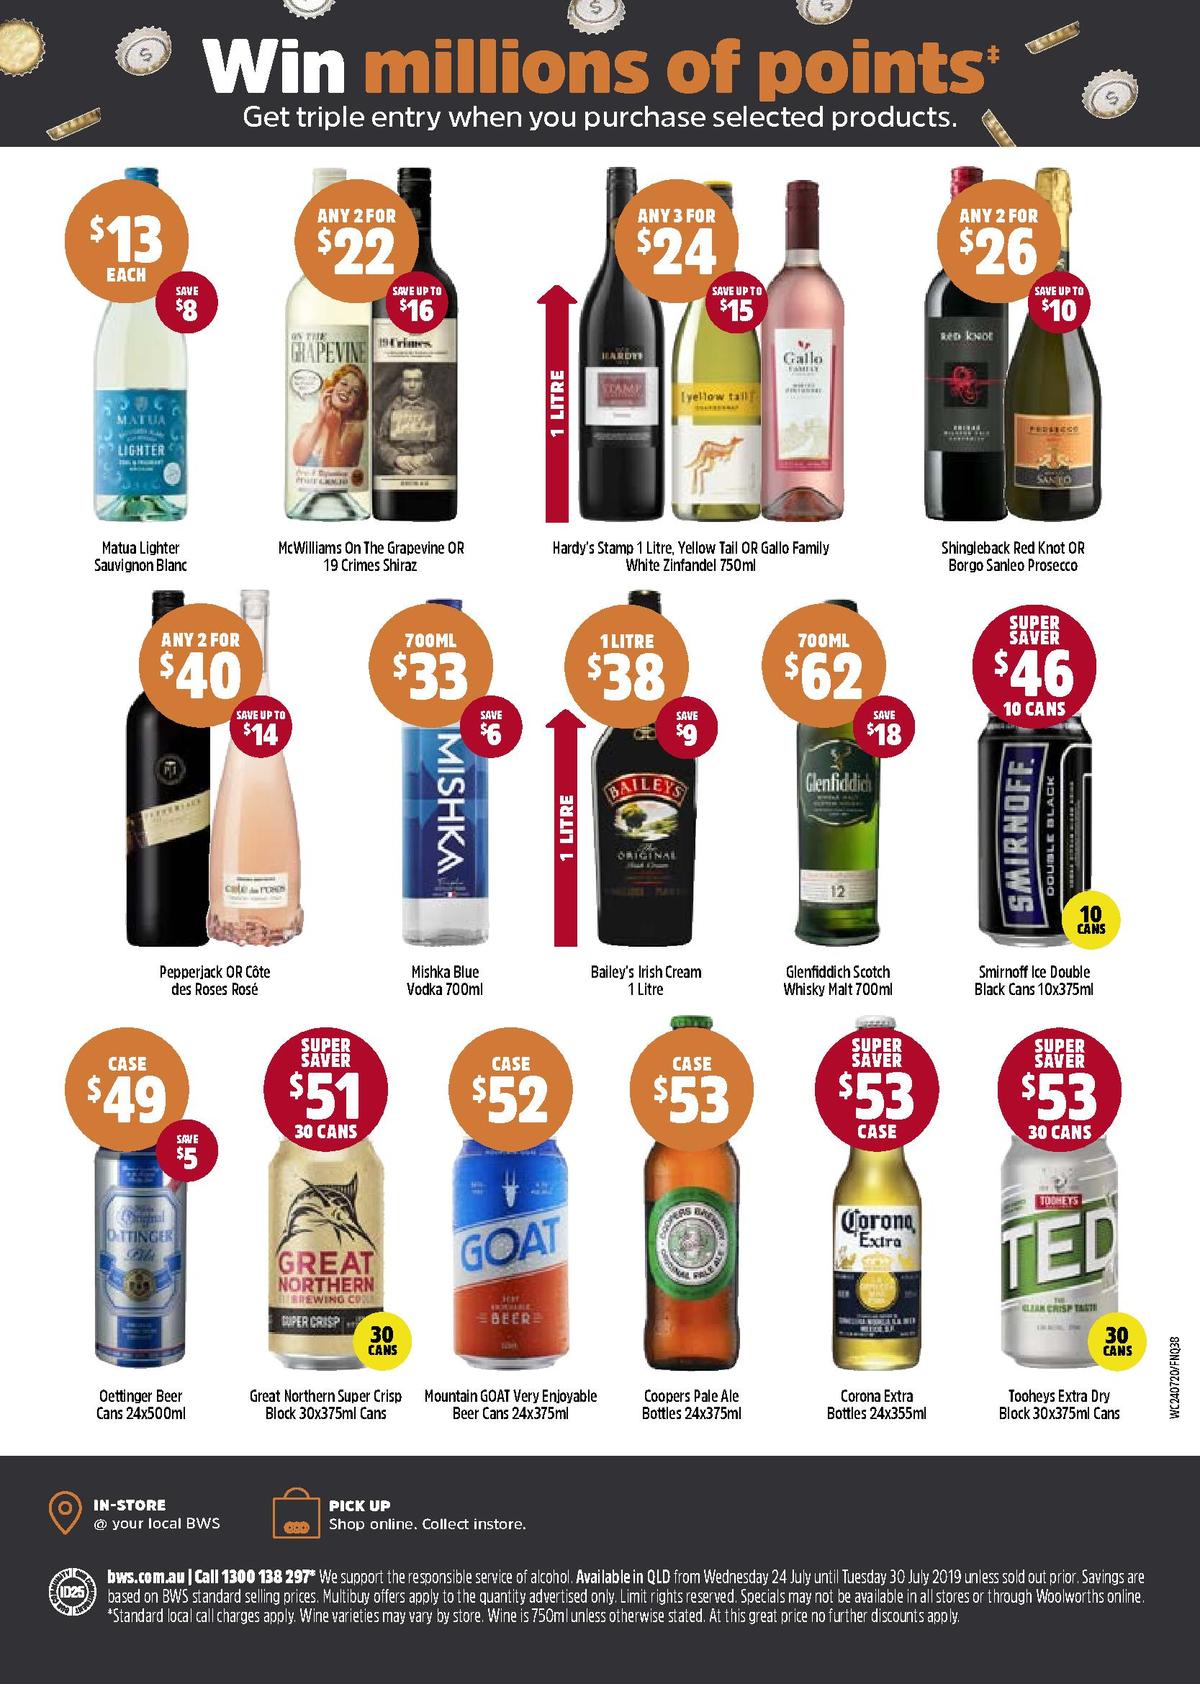 Woolworths Catalogues from 24 July